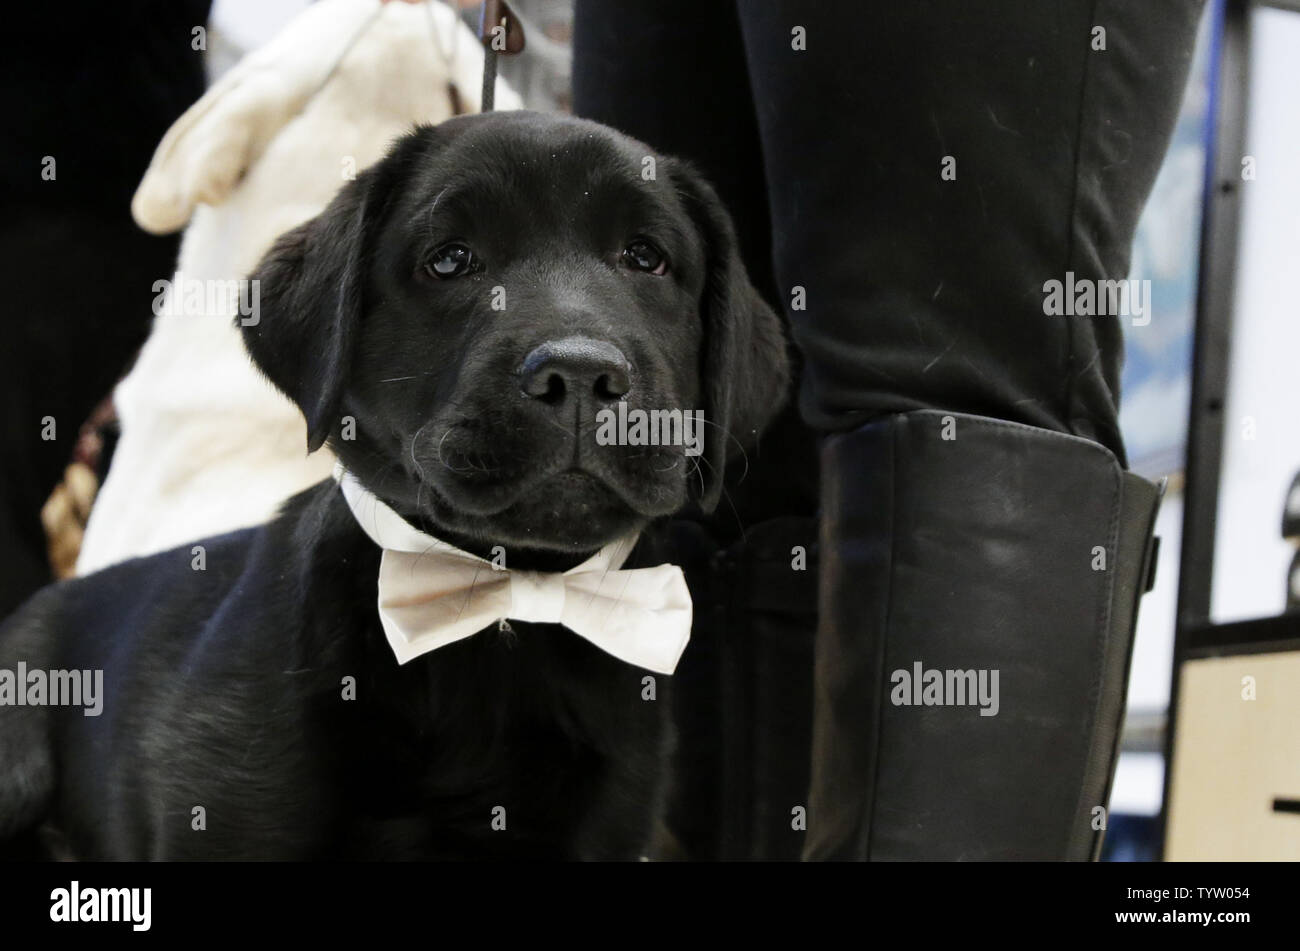 Rummy, a Labrador Retriever puppy stands on the floor of the ...